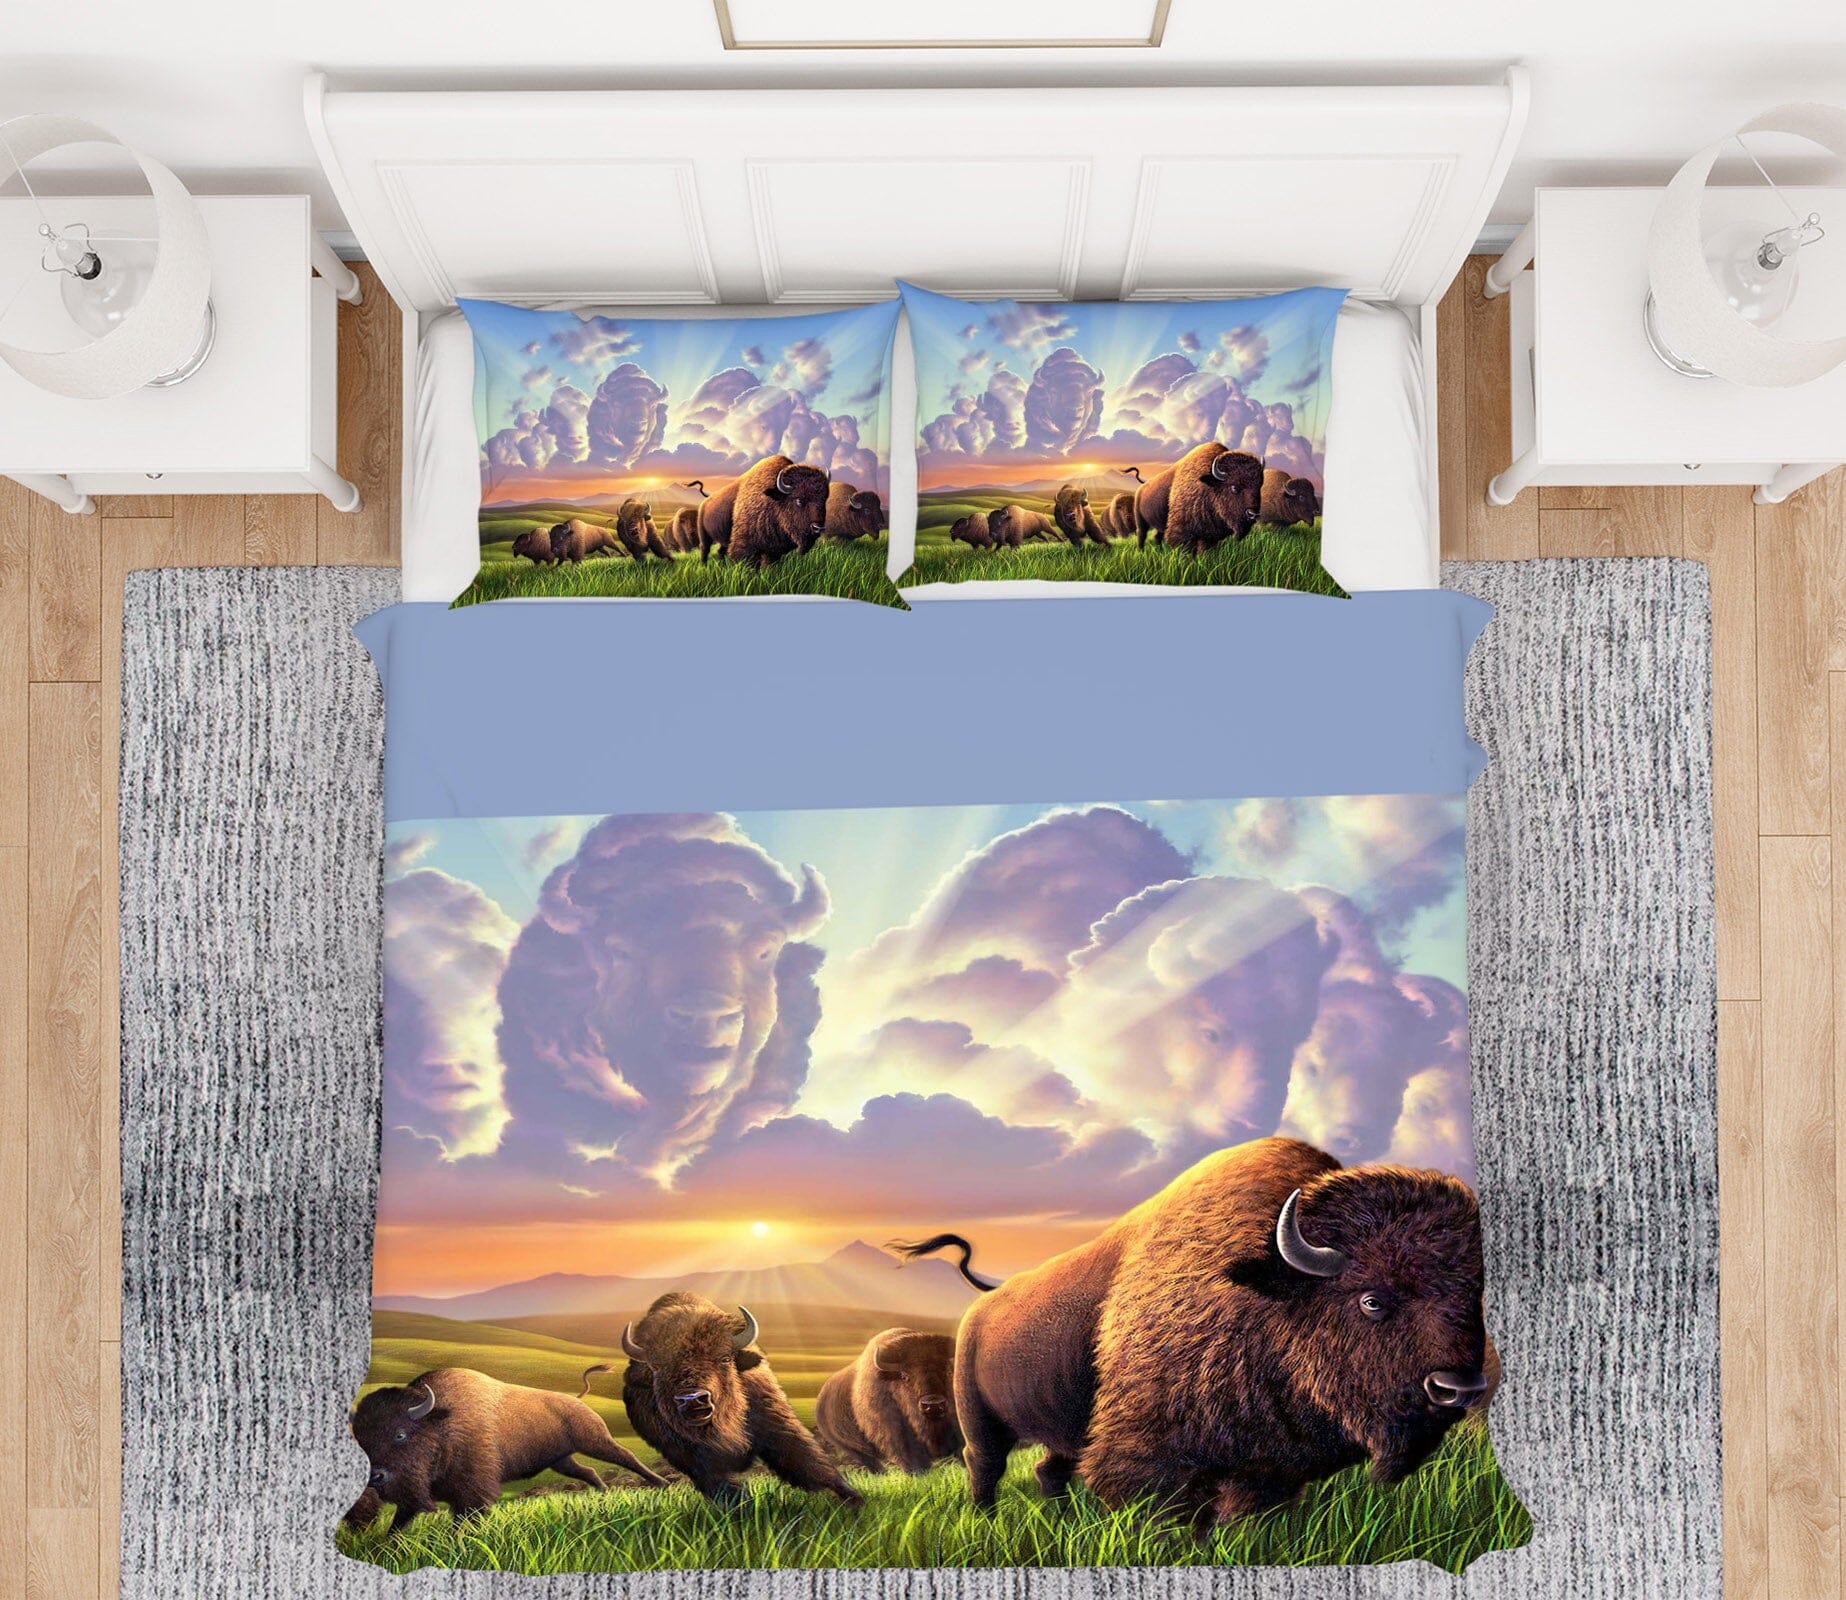 3D Stampede 2133 Jerry LoFaro bedding Bed Pillowcases Quilt Quiet Covers AJ Creativity Home 